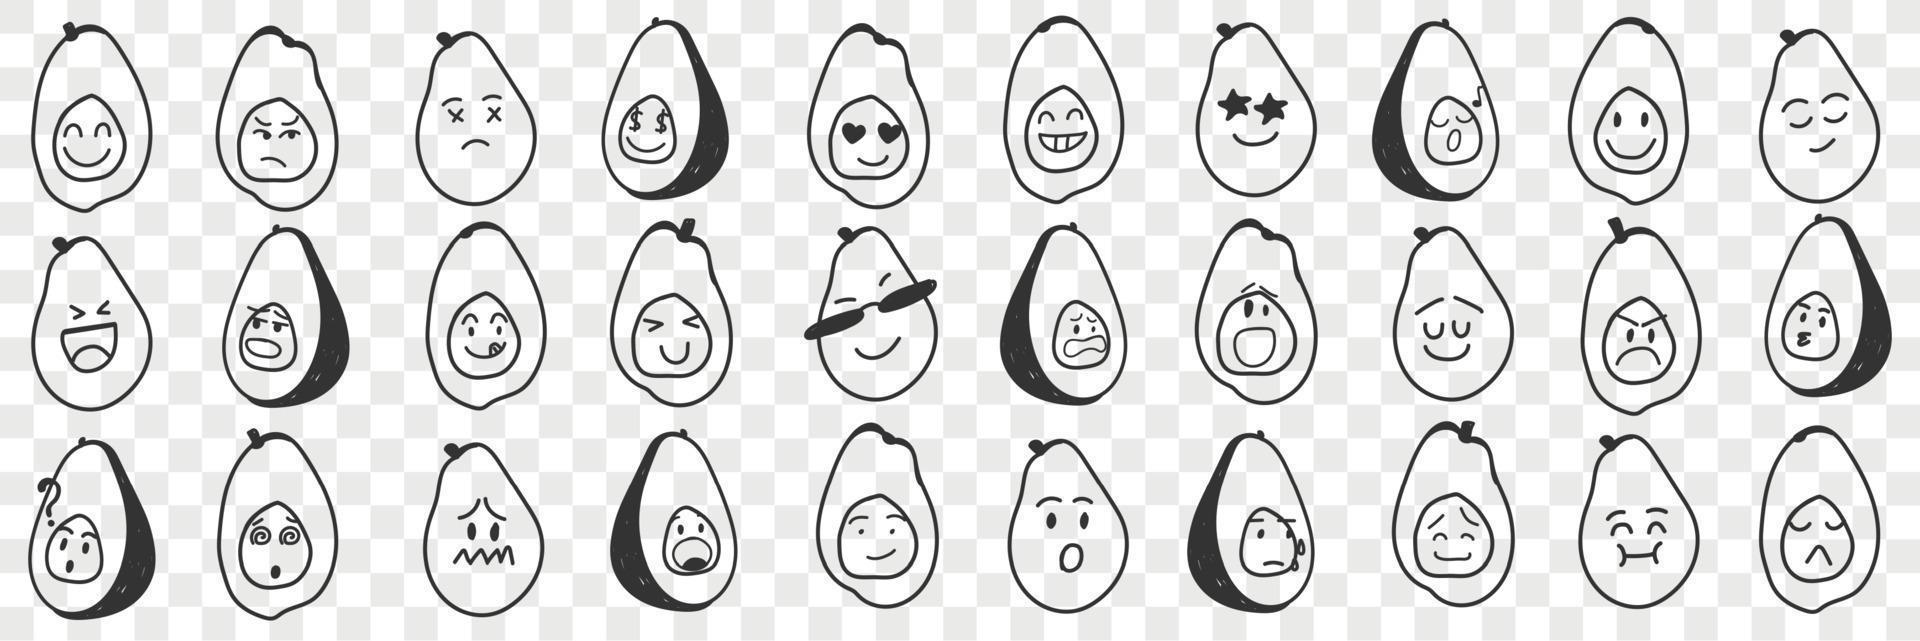 Funny avocado emoji doodle set. Collection of hand drawn various avocado fruits with funny cute faces with various expressions emoticon isolated on transparent background vector